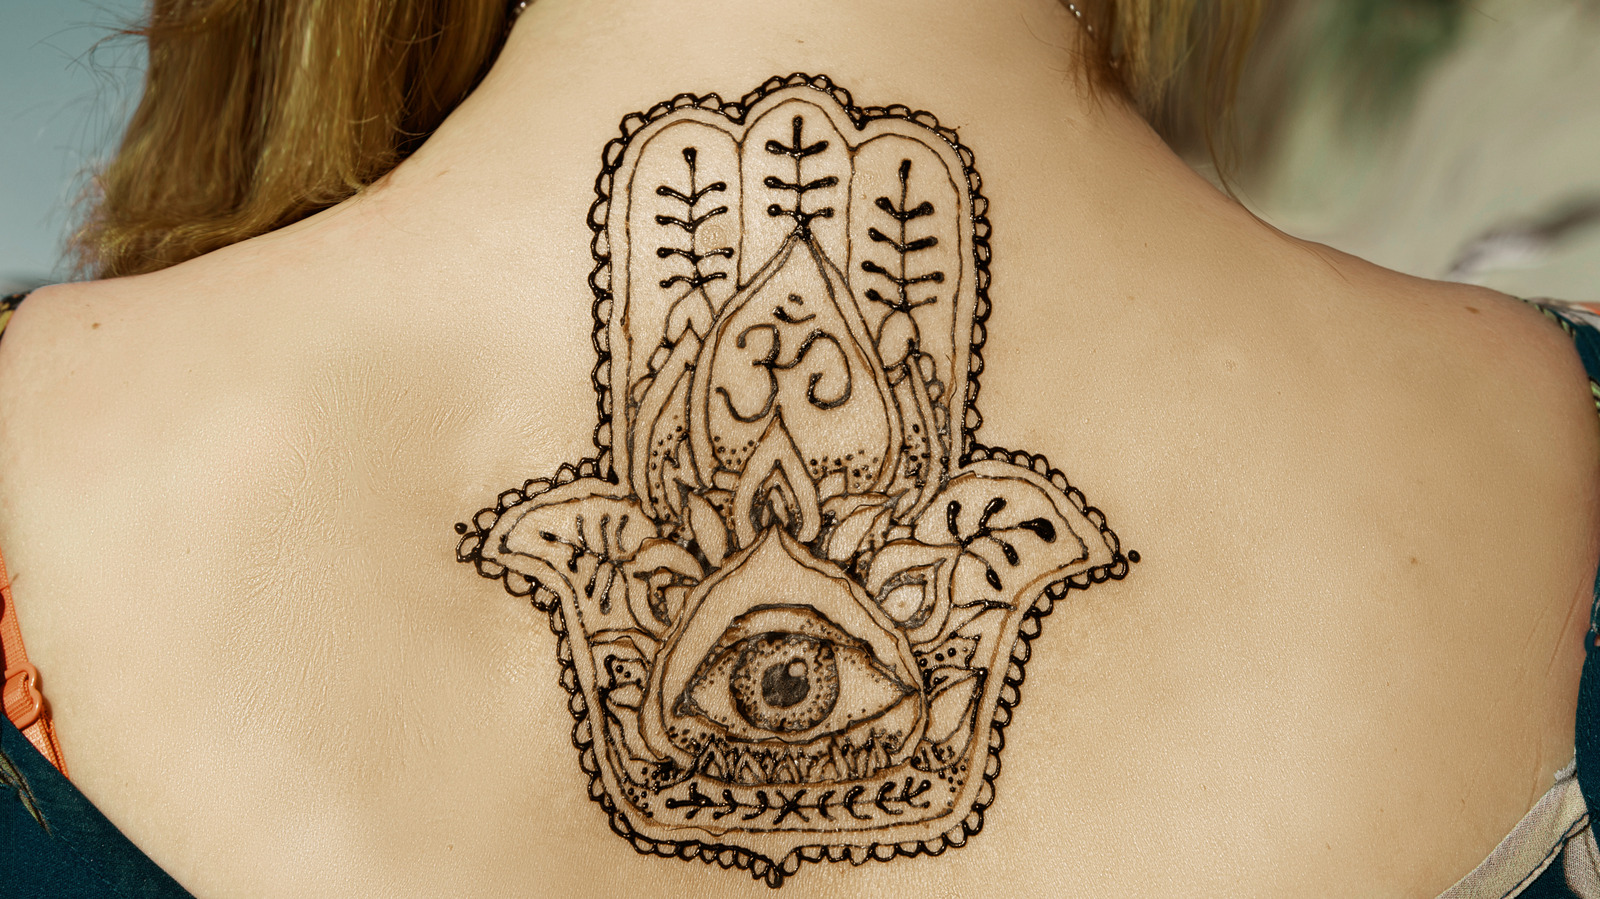 ATTRACTIVE Back Tattoo Design Ideas For Girls 2021  BEST Back Tattoos For  Girls  Womens Tattoos  YouTube